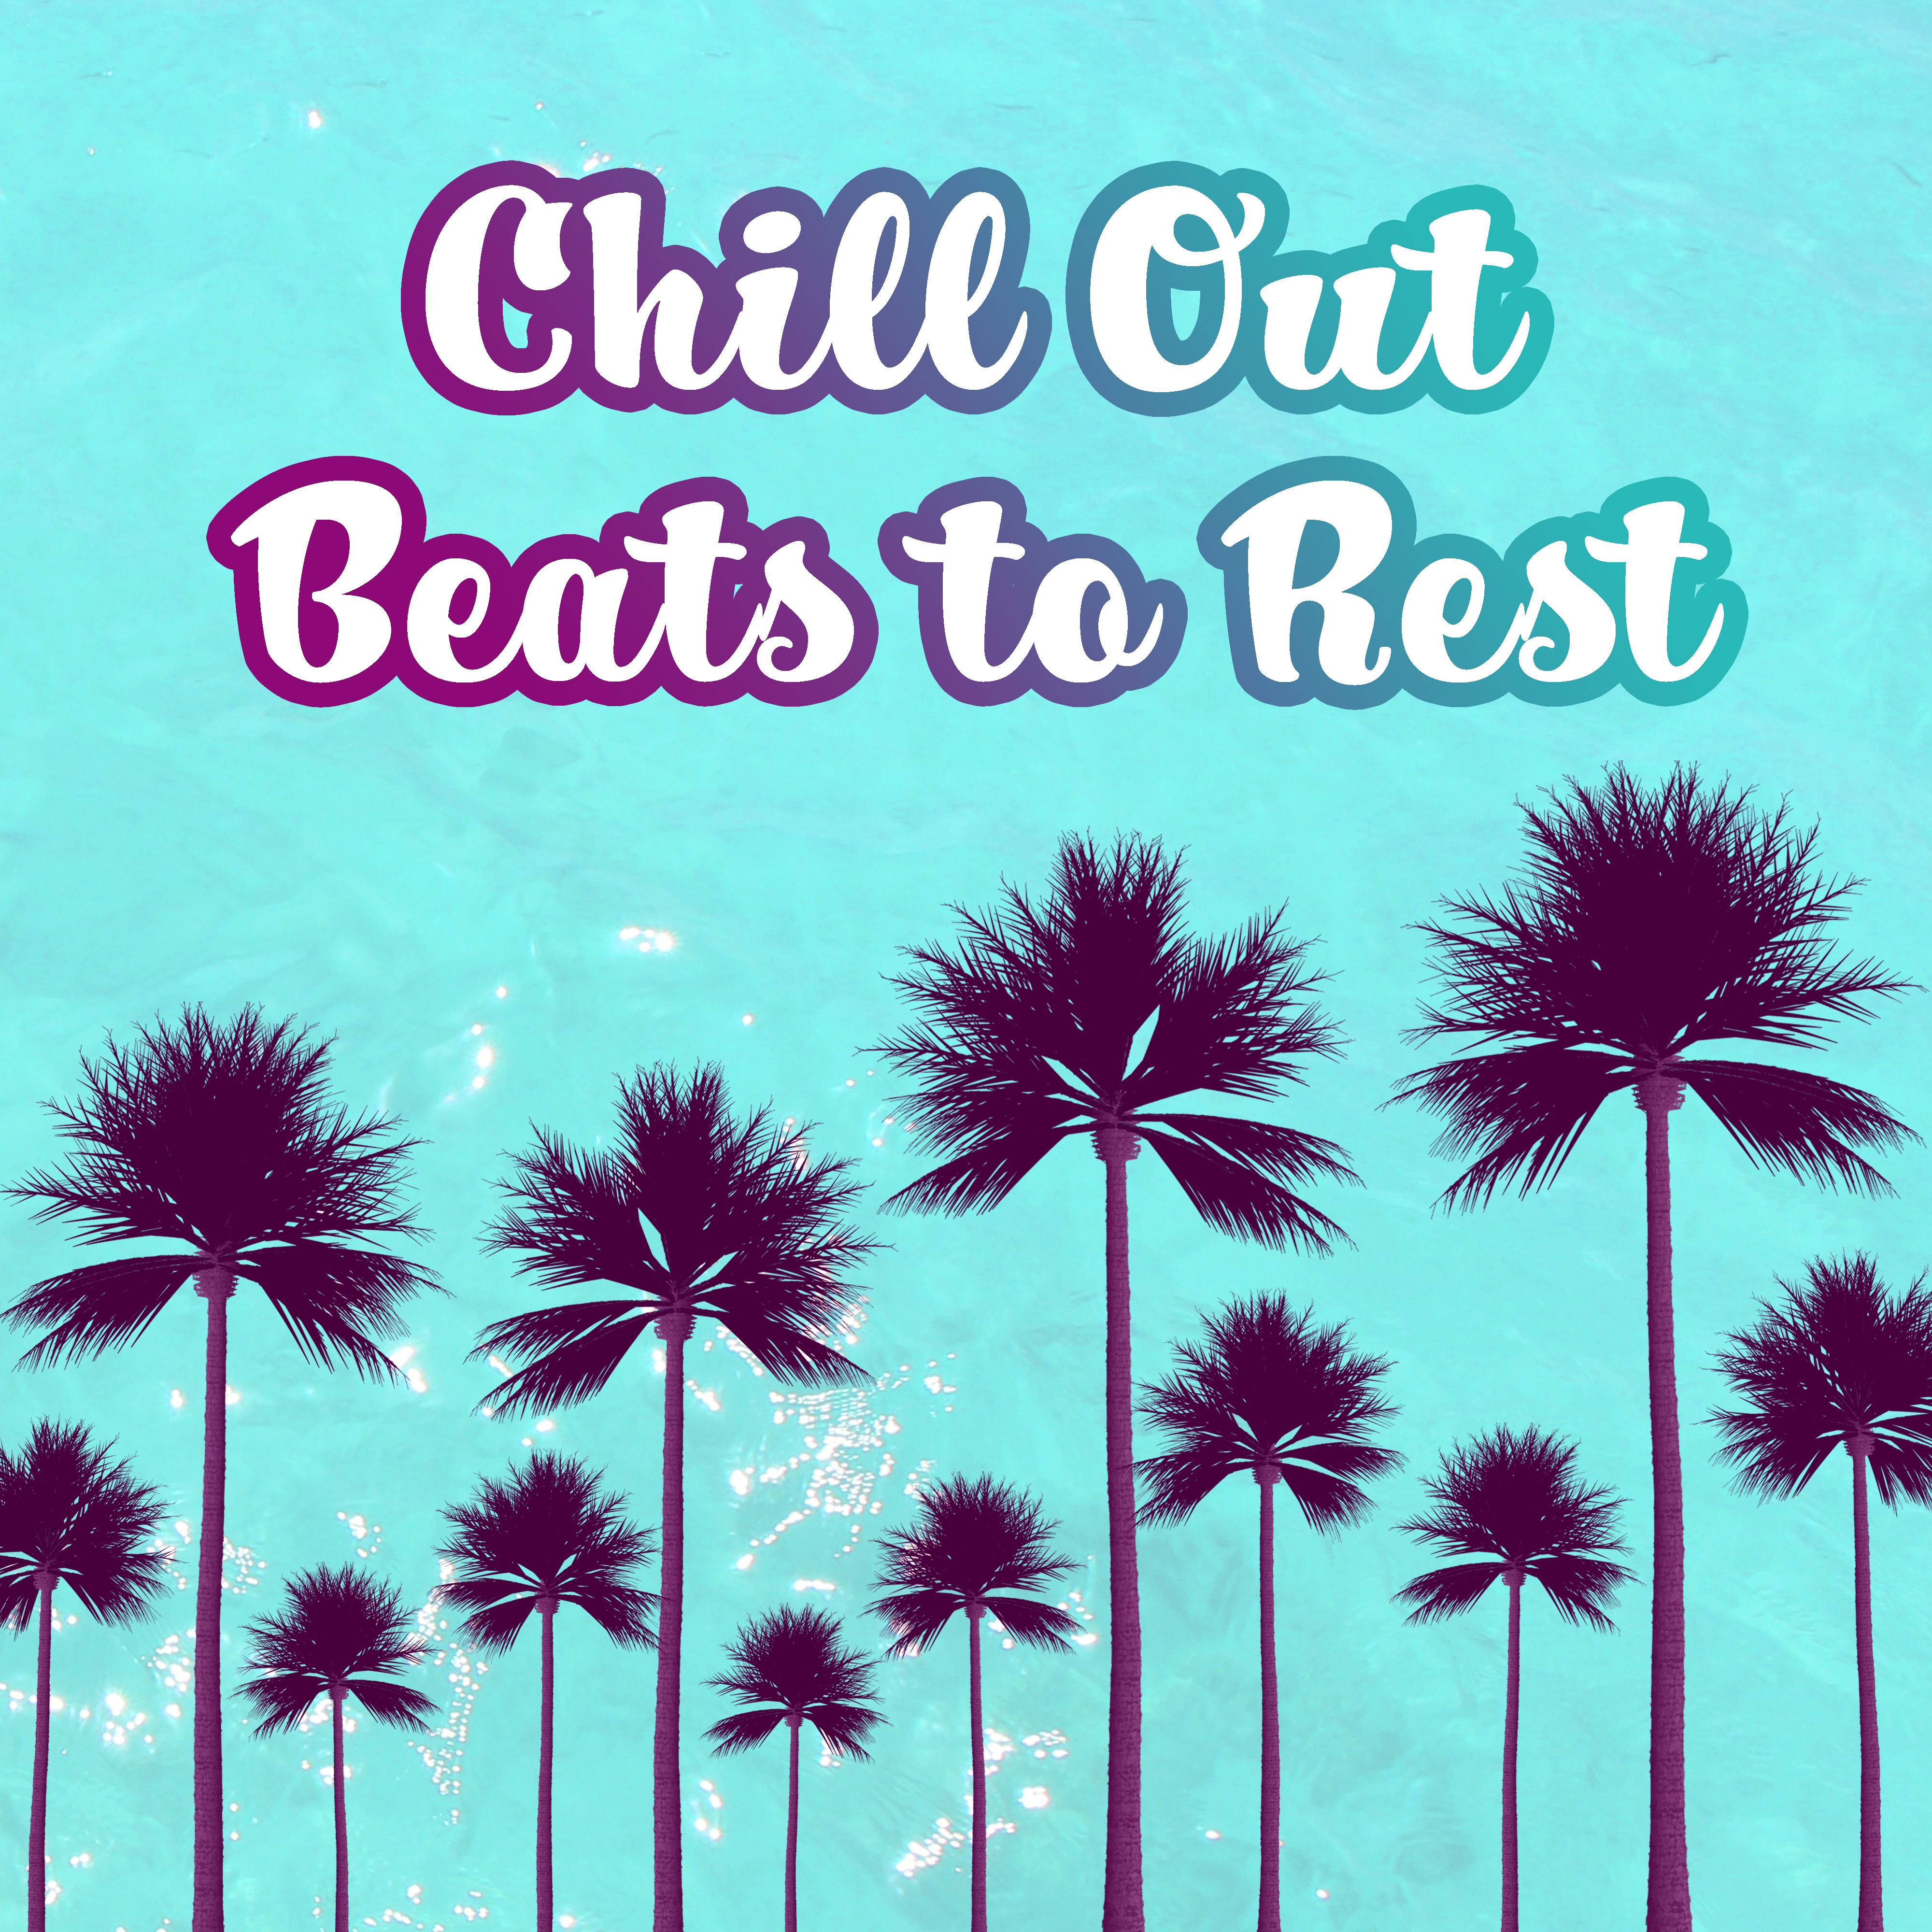 Chill Out Beats to Rest – Easy Listening, Relaxing Beats, Chill Out Memories, Summer Time Music